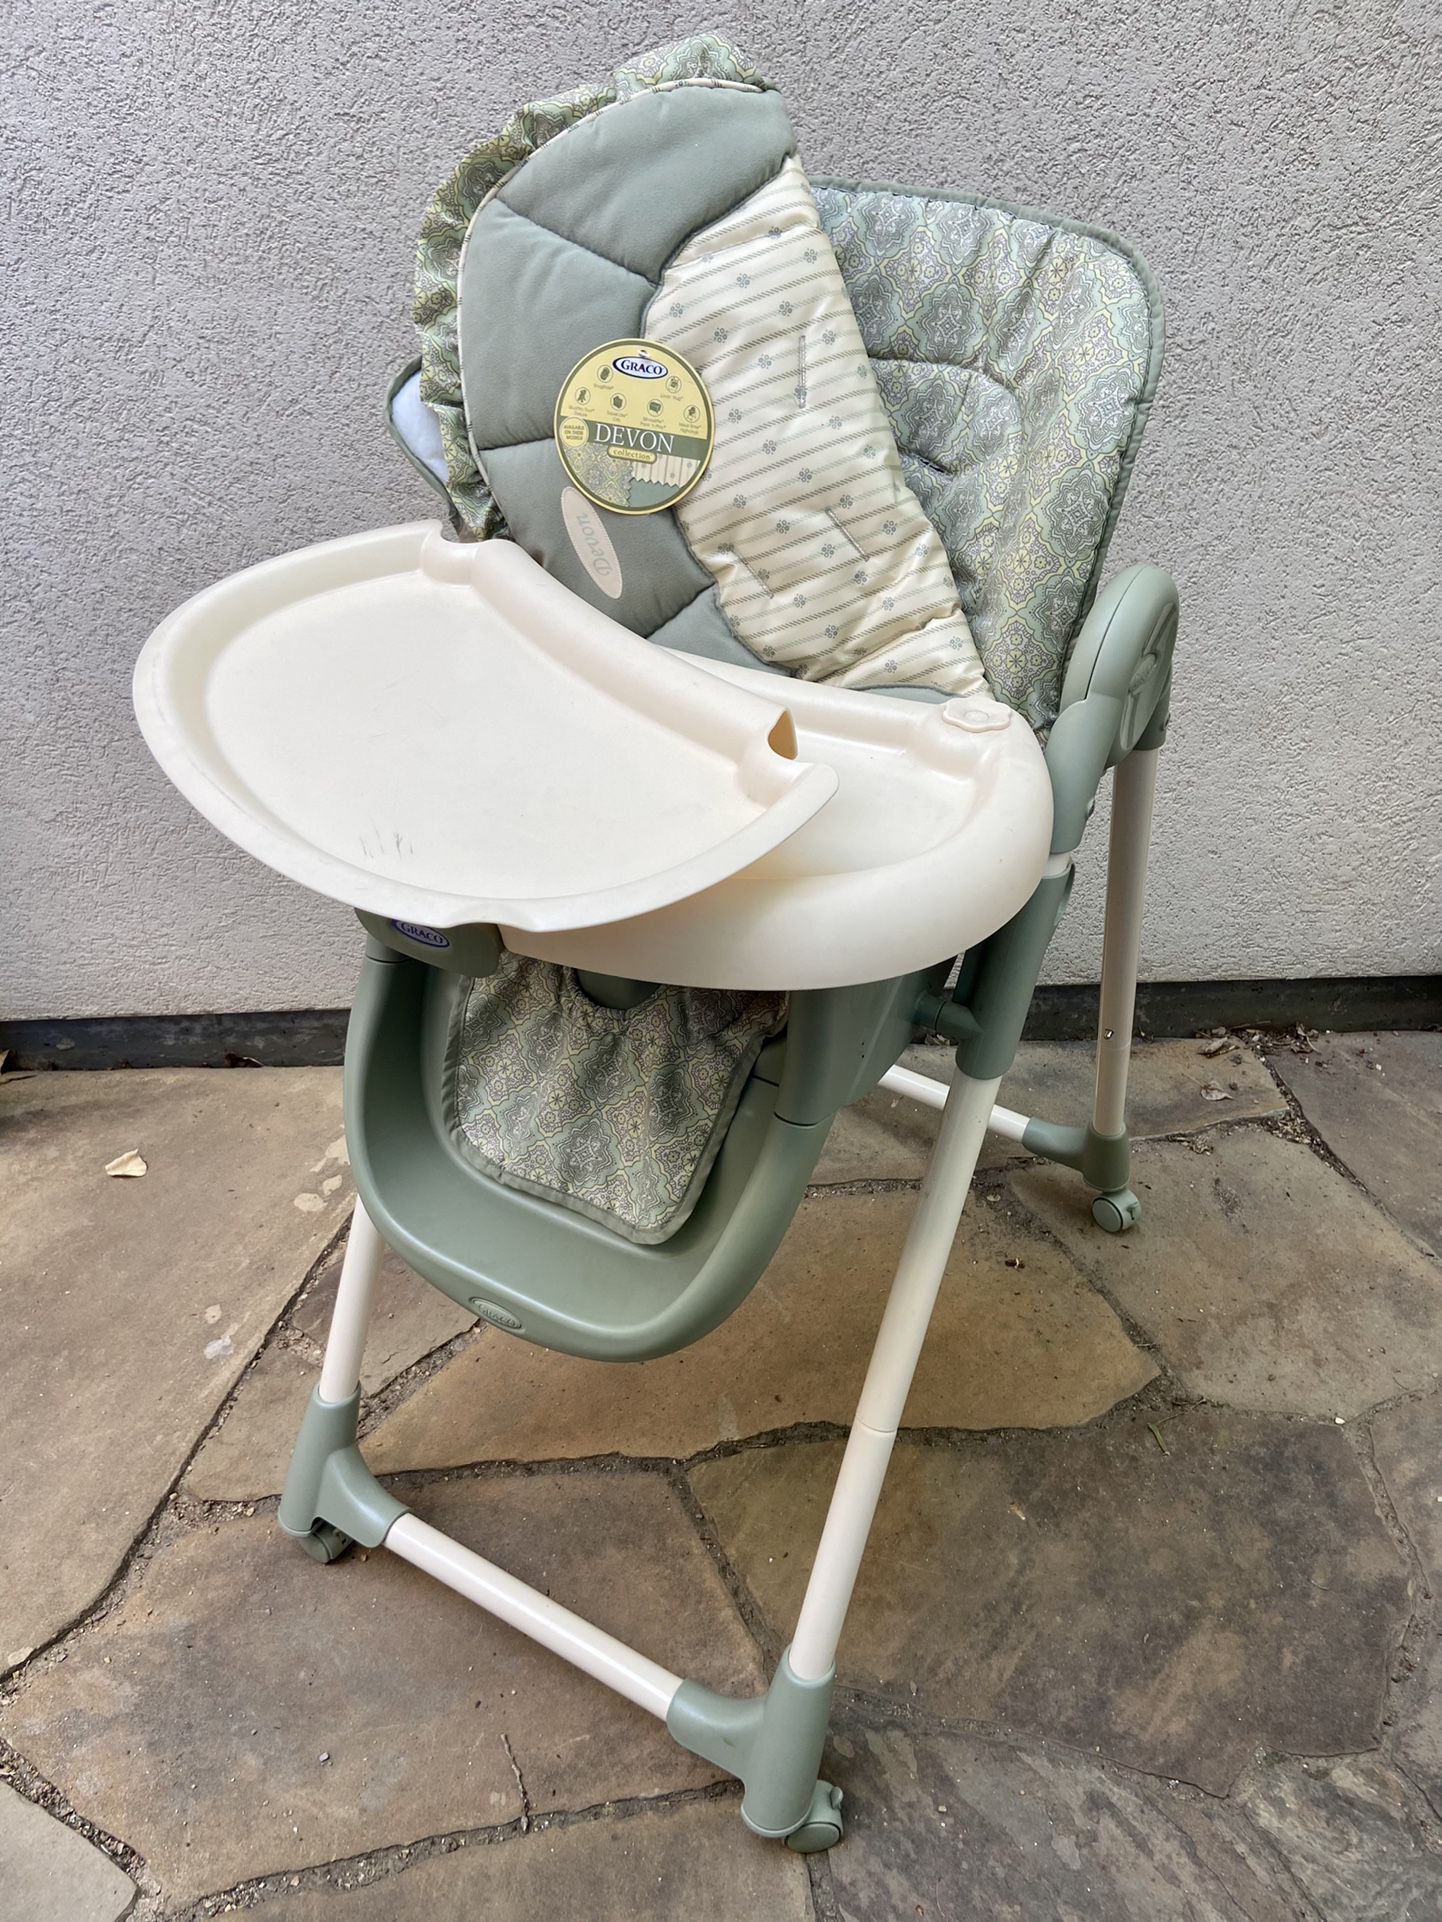 Graco folding high chair with extras